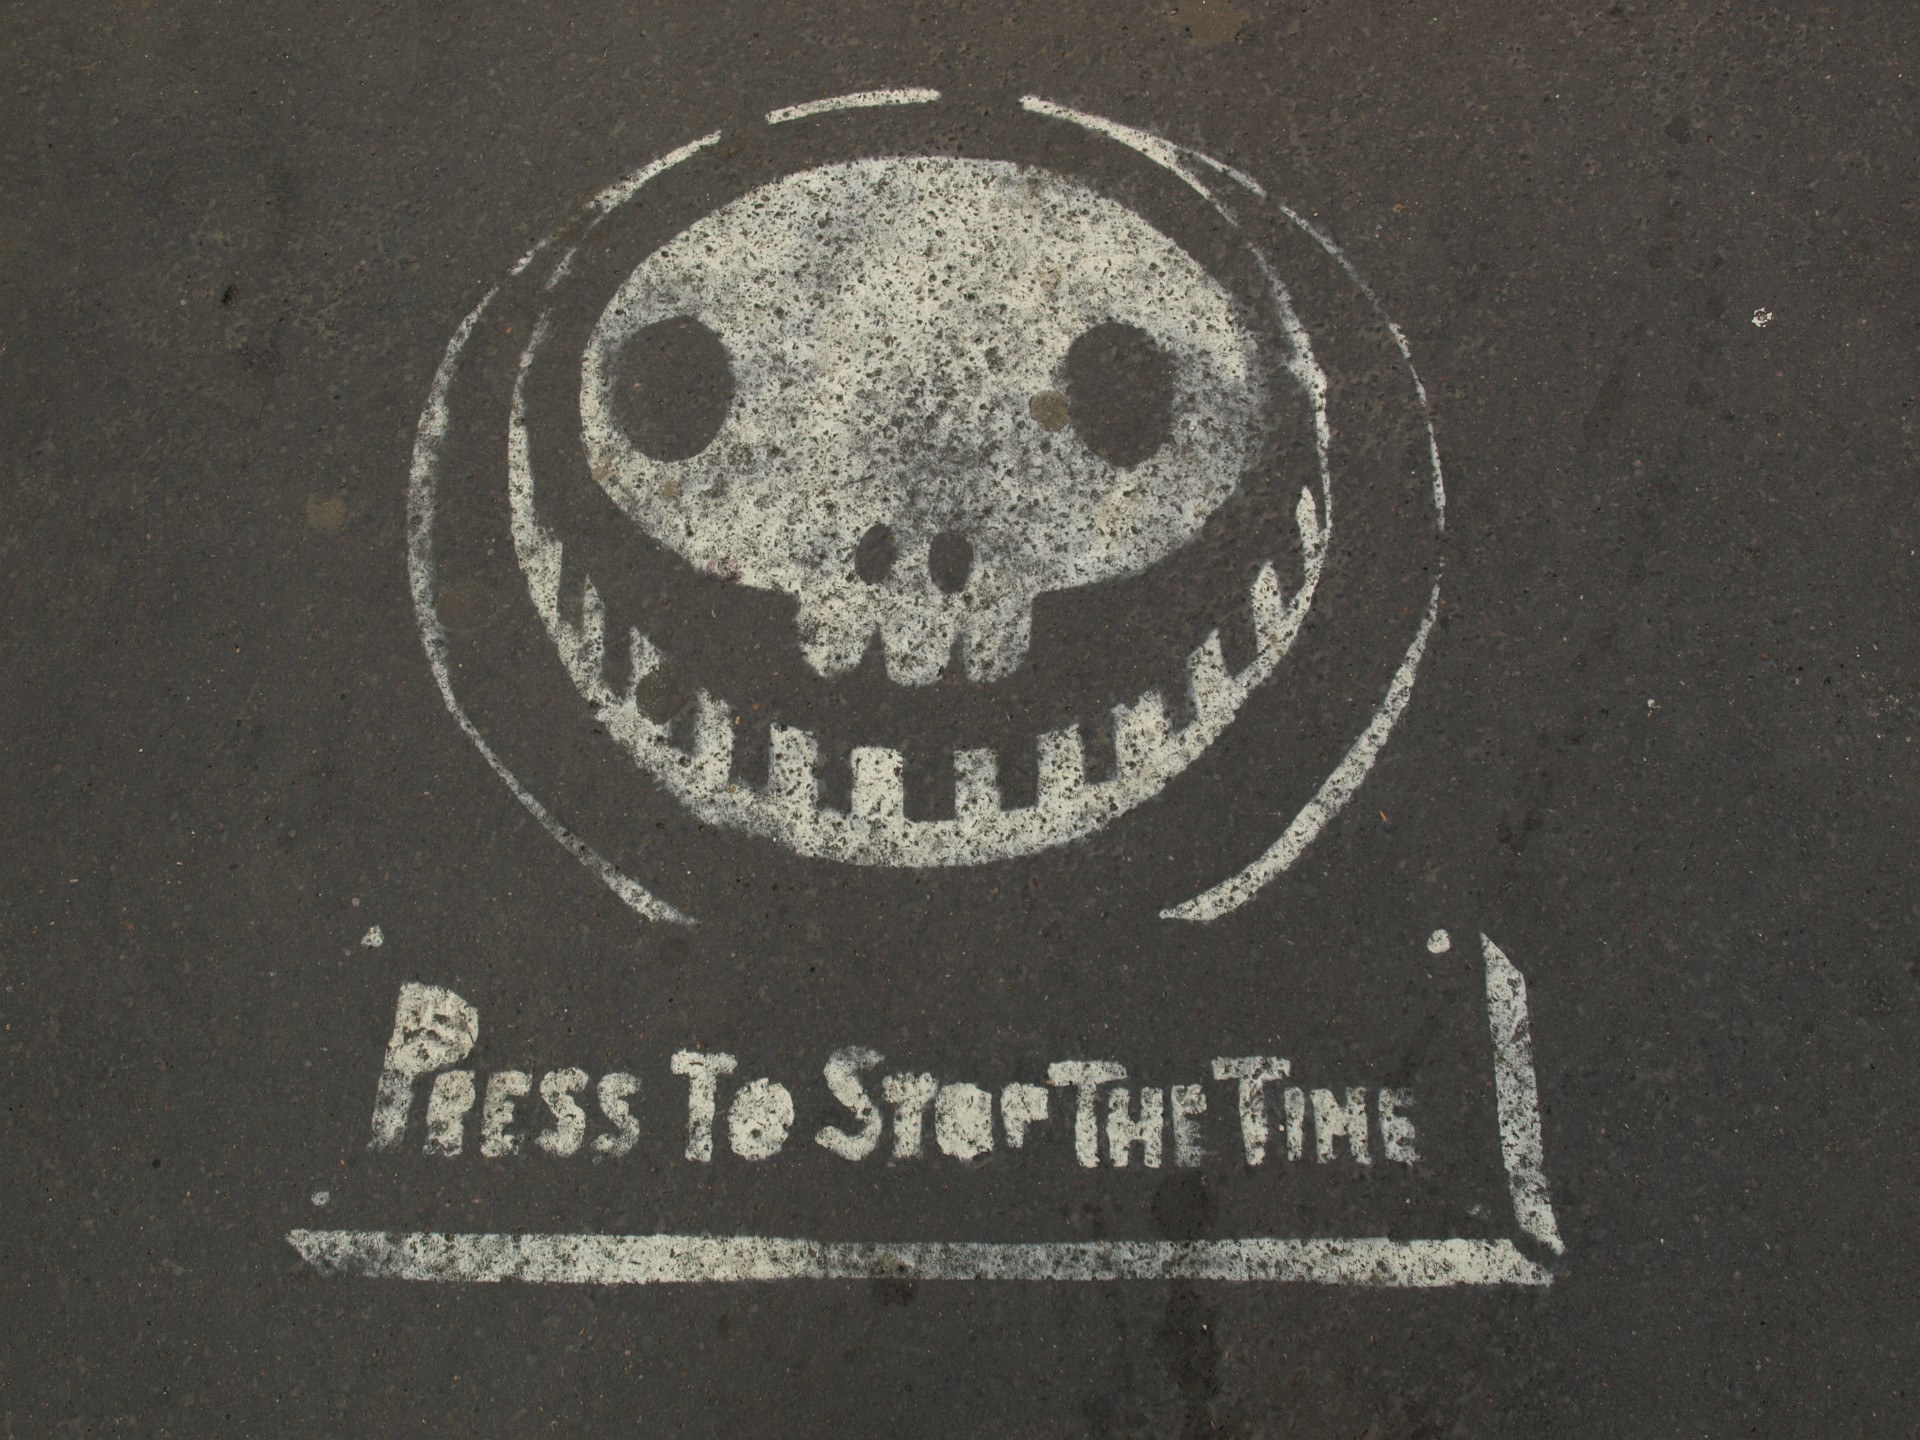 Press to Stop the Time